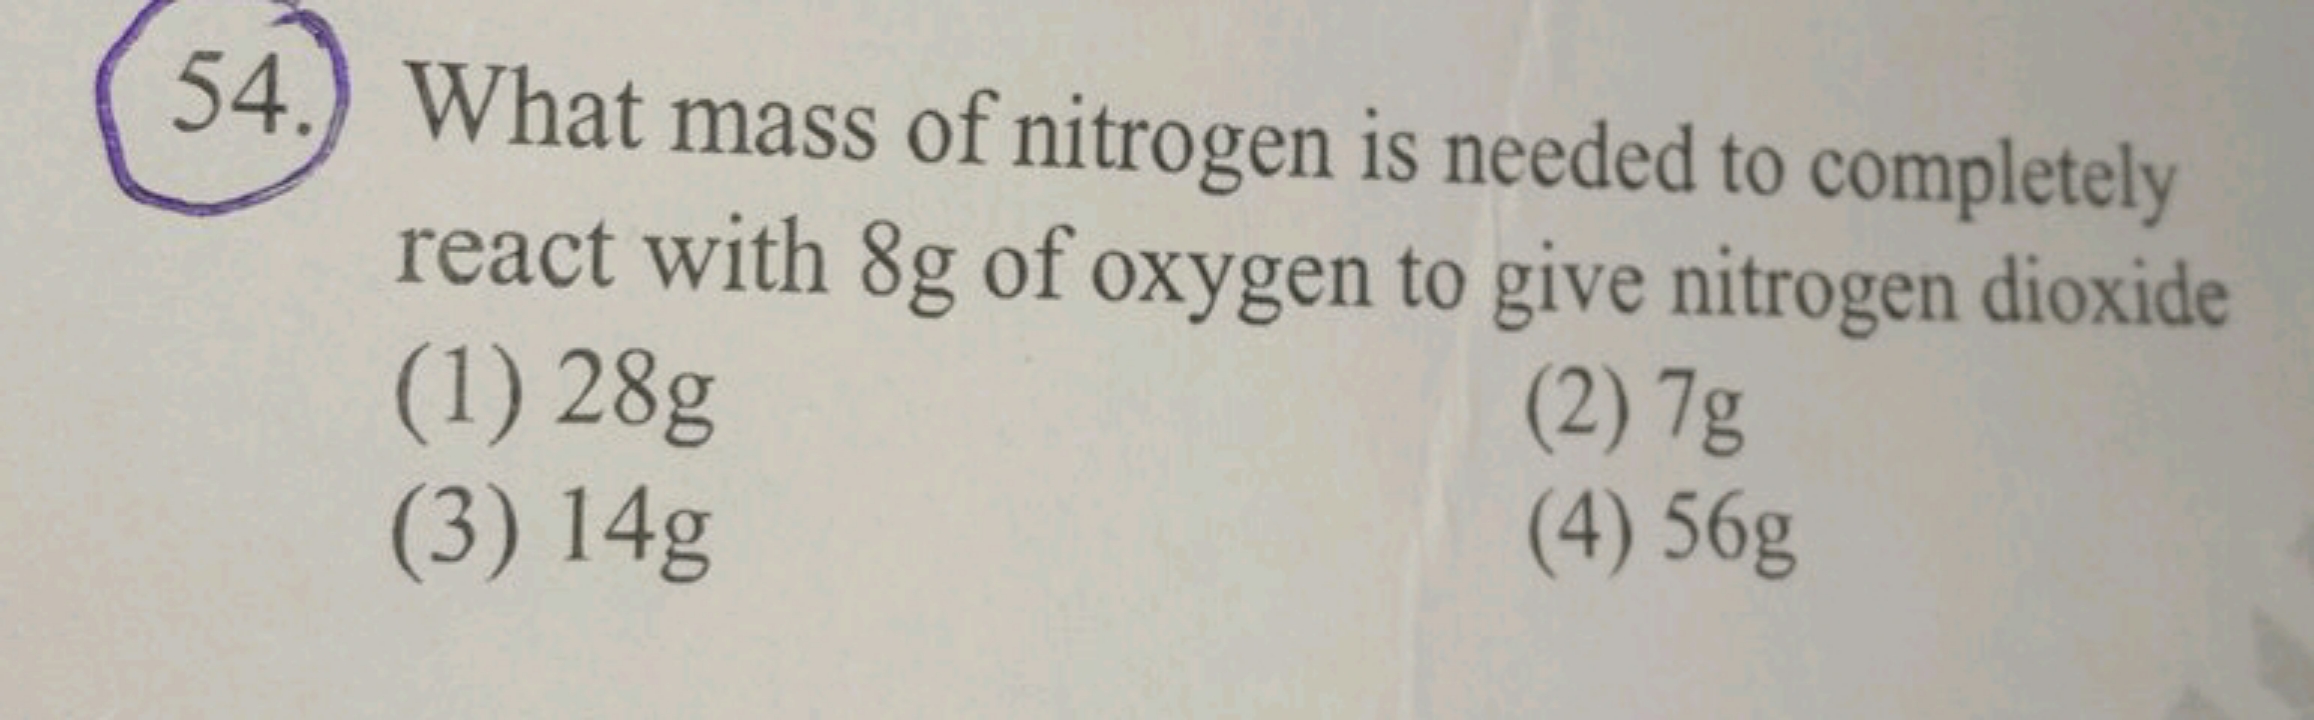 What mass of nitrogen is needed to completely react with 8 g of oxygen